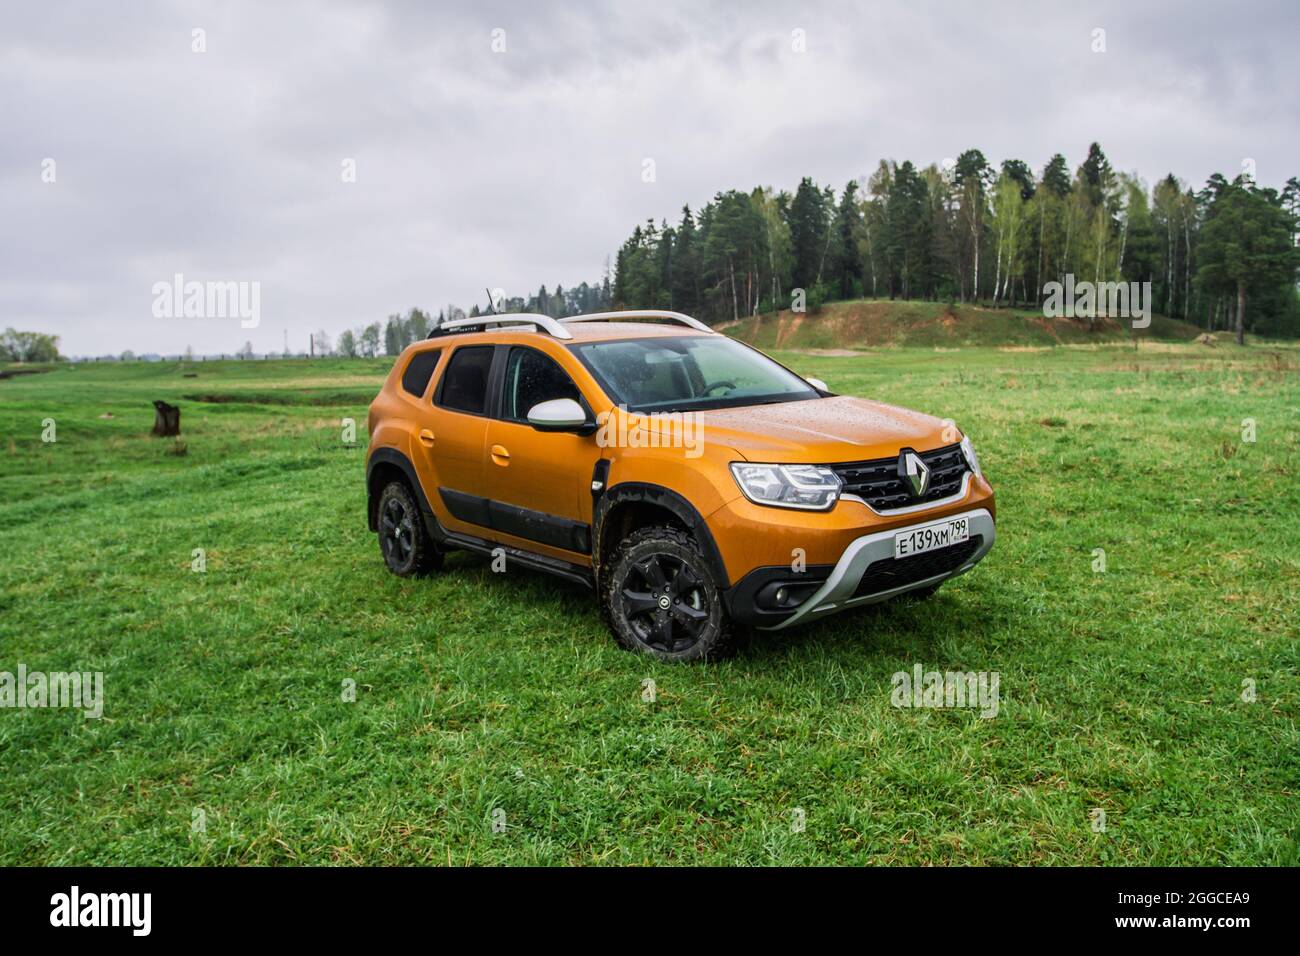 MOSCOW, RUSSIA - MAY 08, 2021 Renault Duster second generation